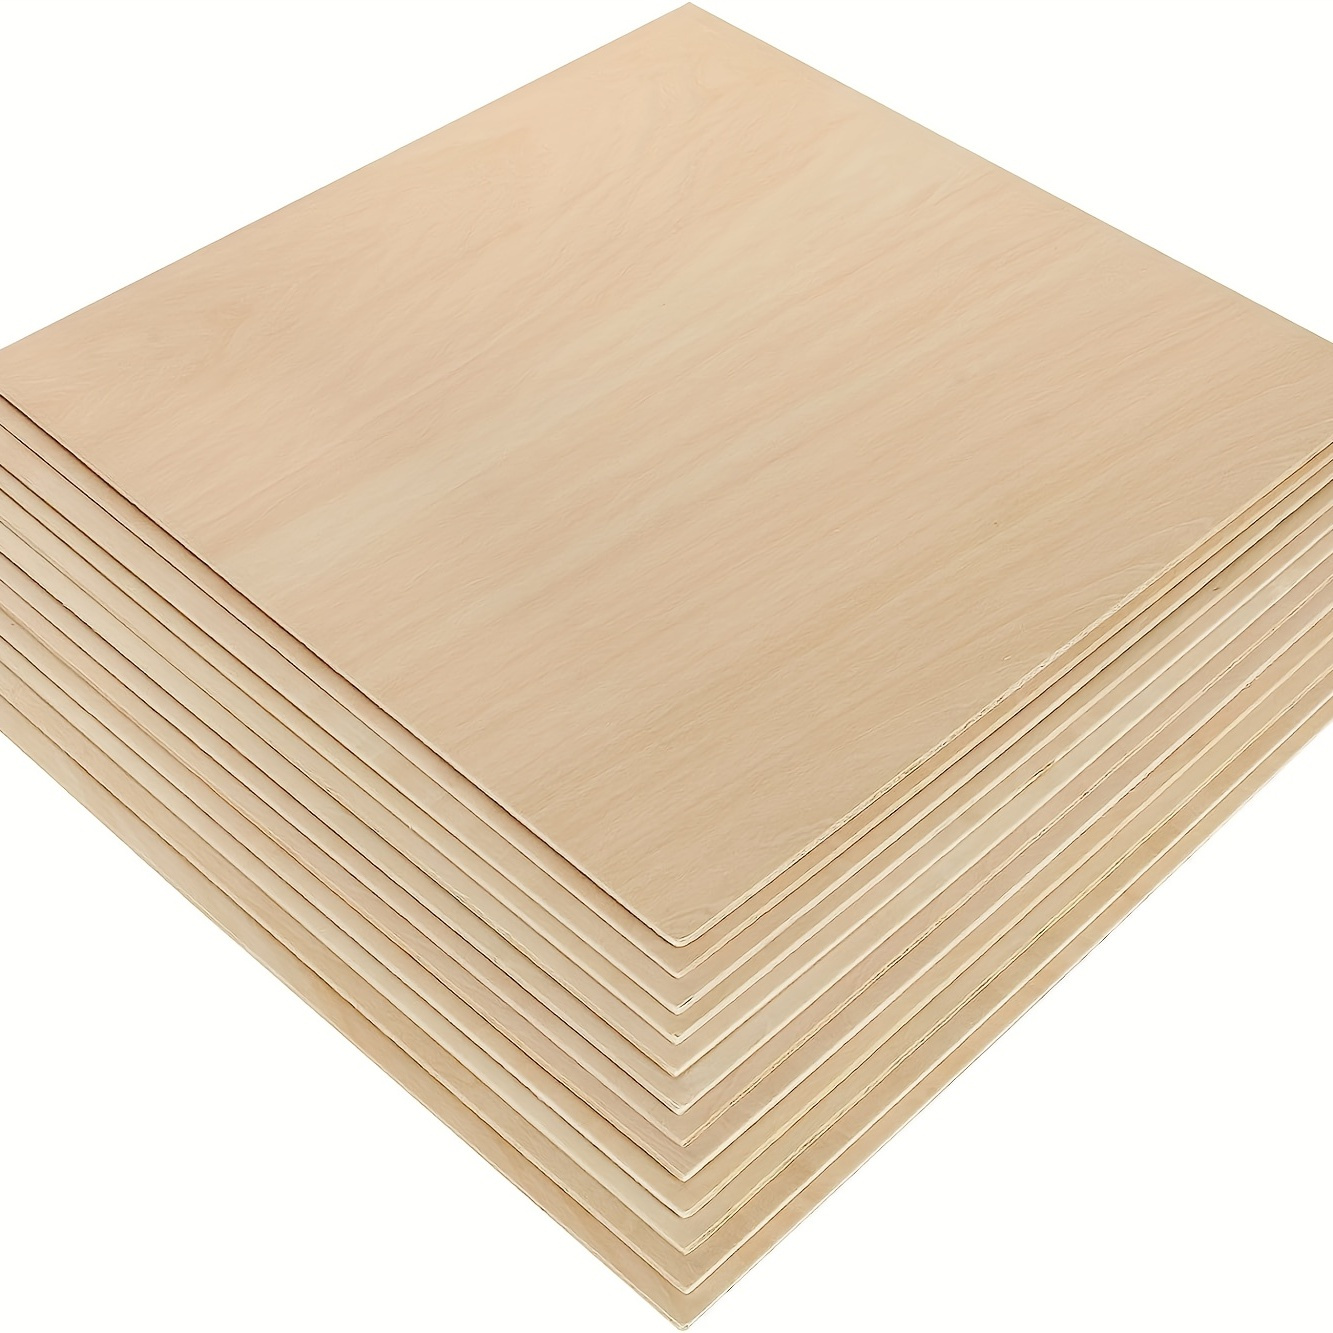 5Pcs 1/1.5/2/3mm Thick Balsa Wood Sheet Wood Chips Board For DIY Model Toys  Building Airplane/Boat Wood DIY Craft Accessories